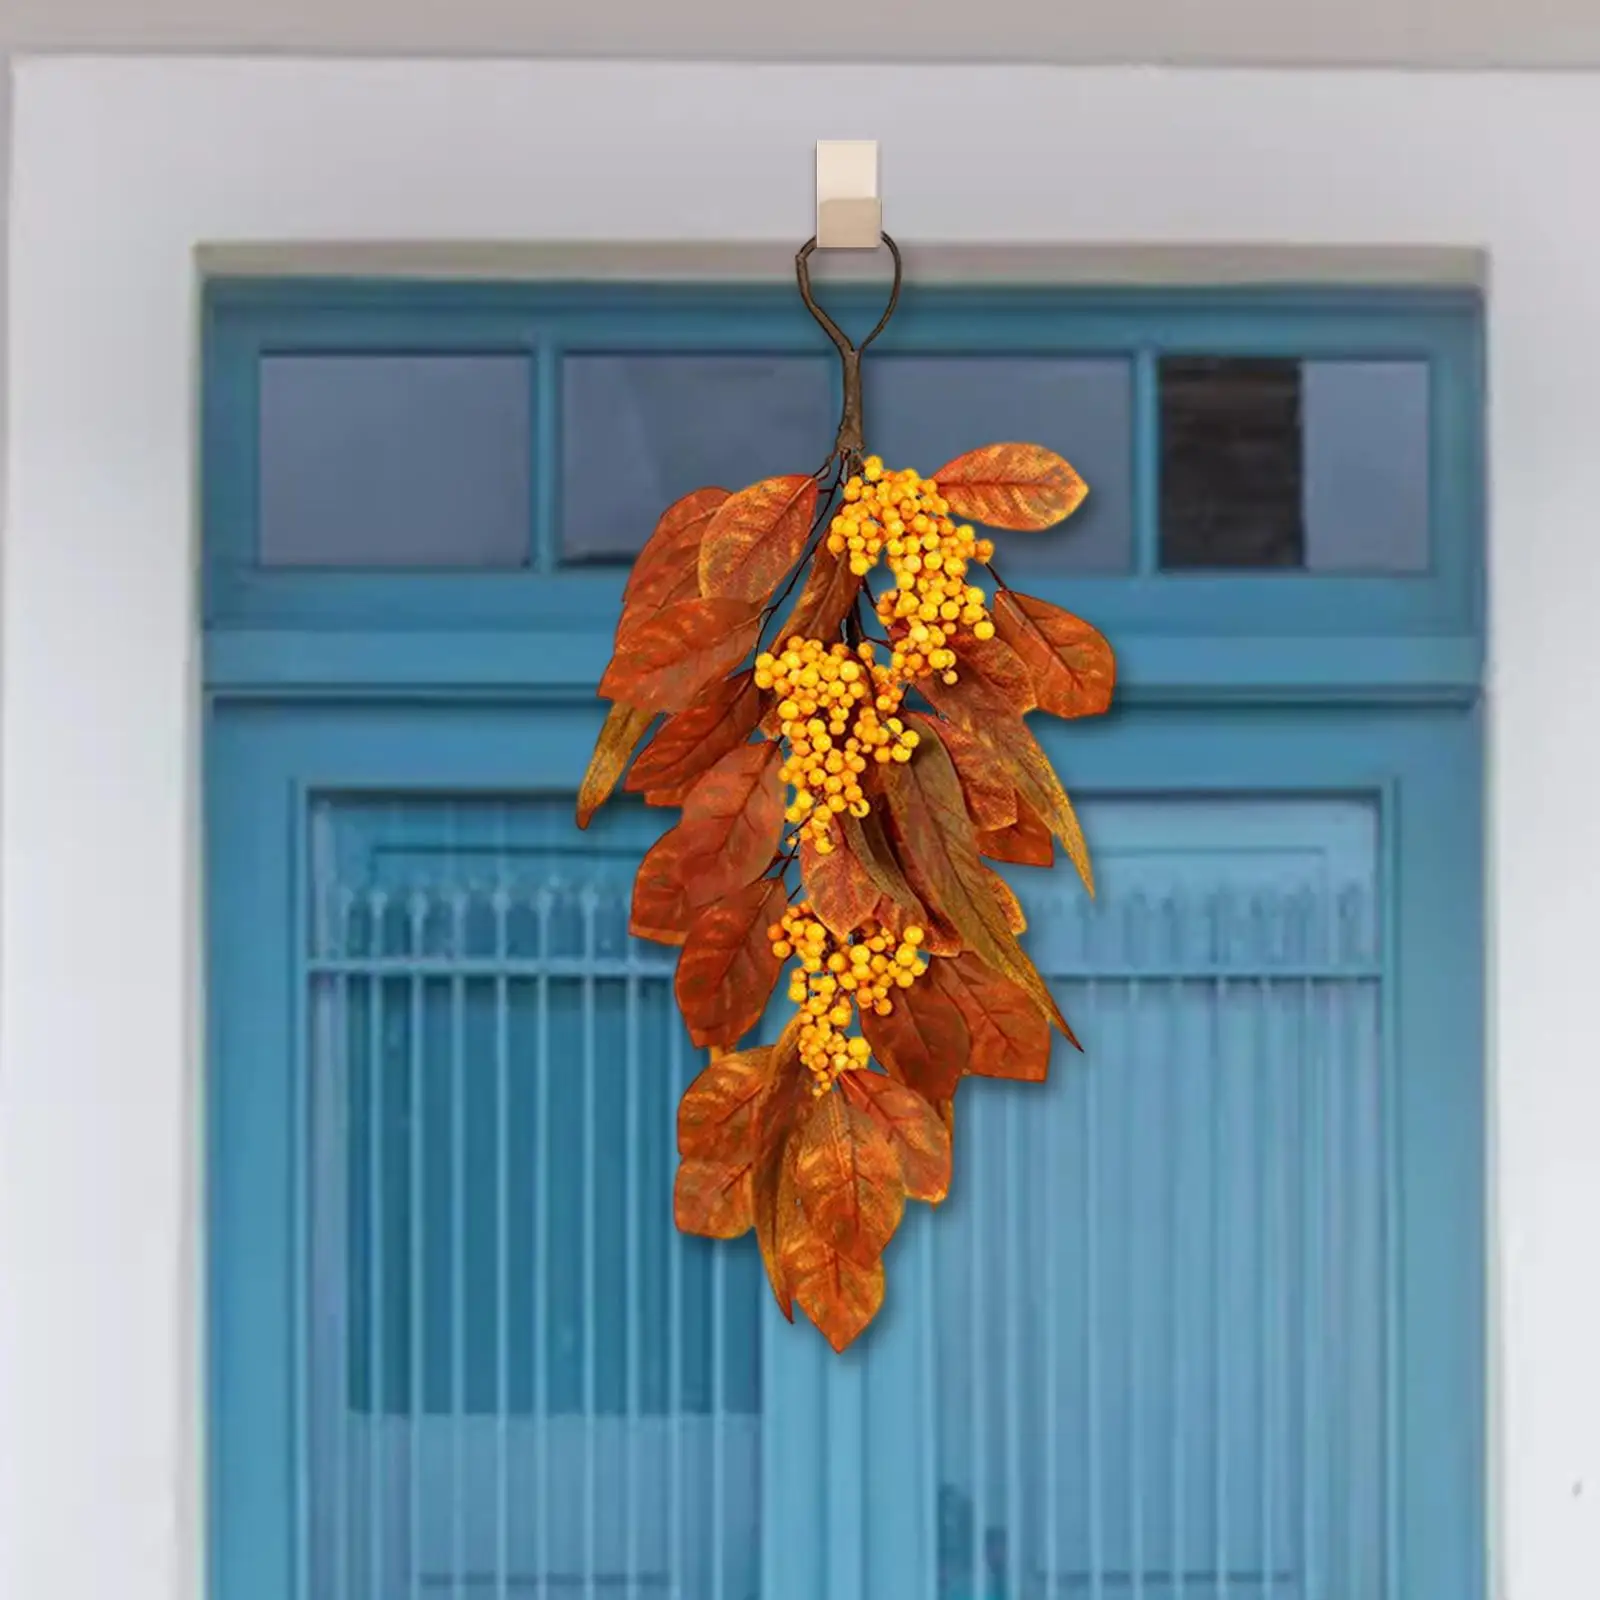 Hanging Fall Teardrop Swag 45cm House Garland Artificial Decorative Swag for Wedding Fall Branches door Decorative